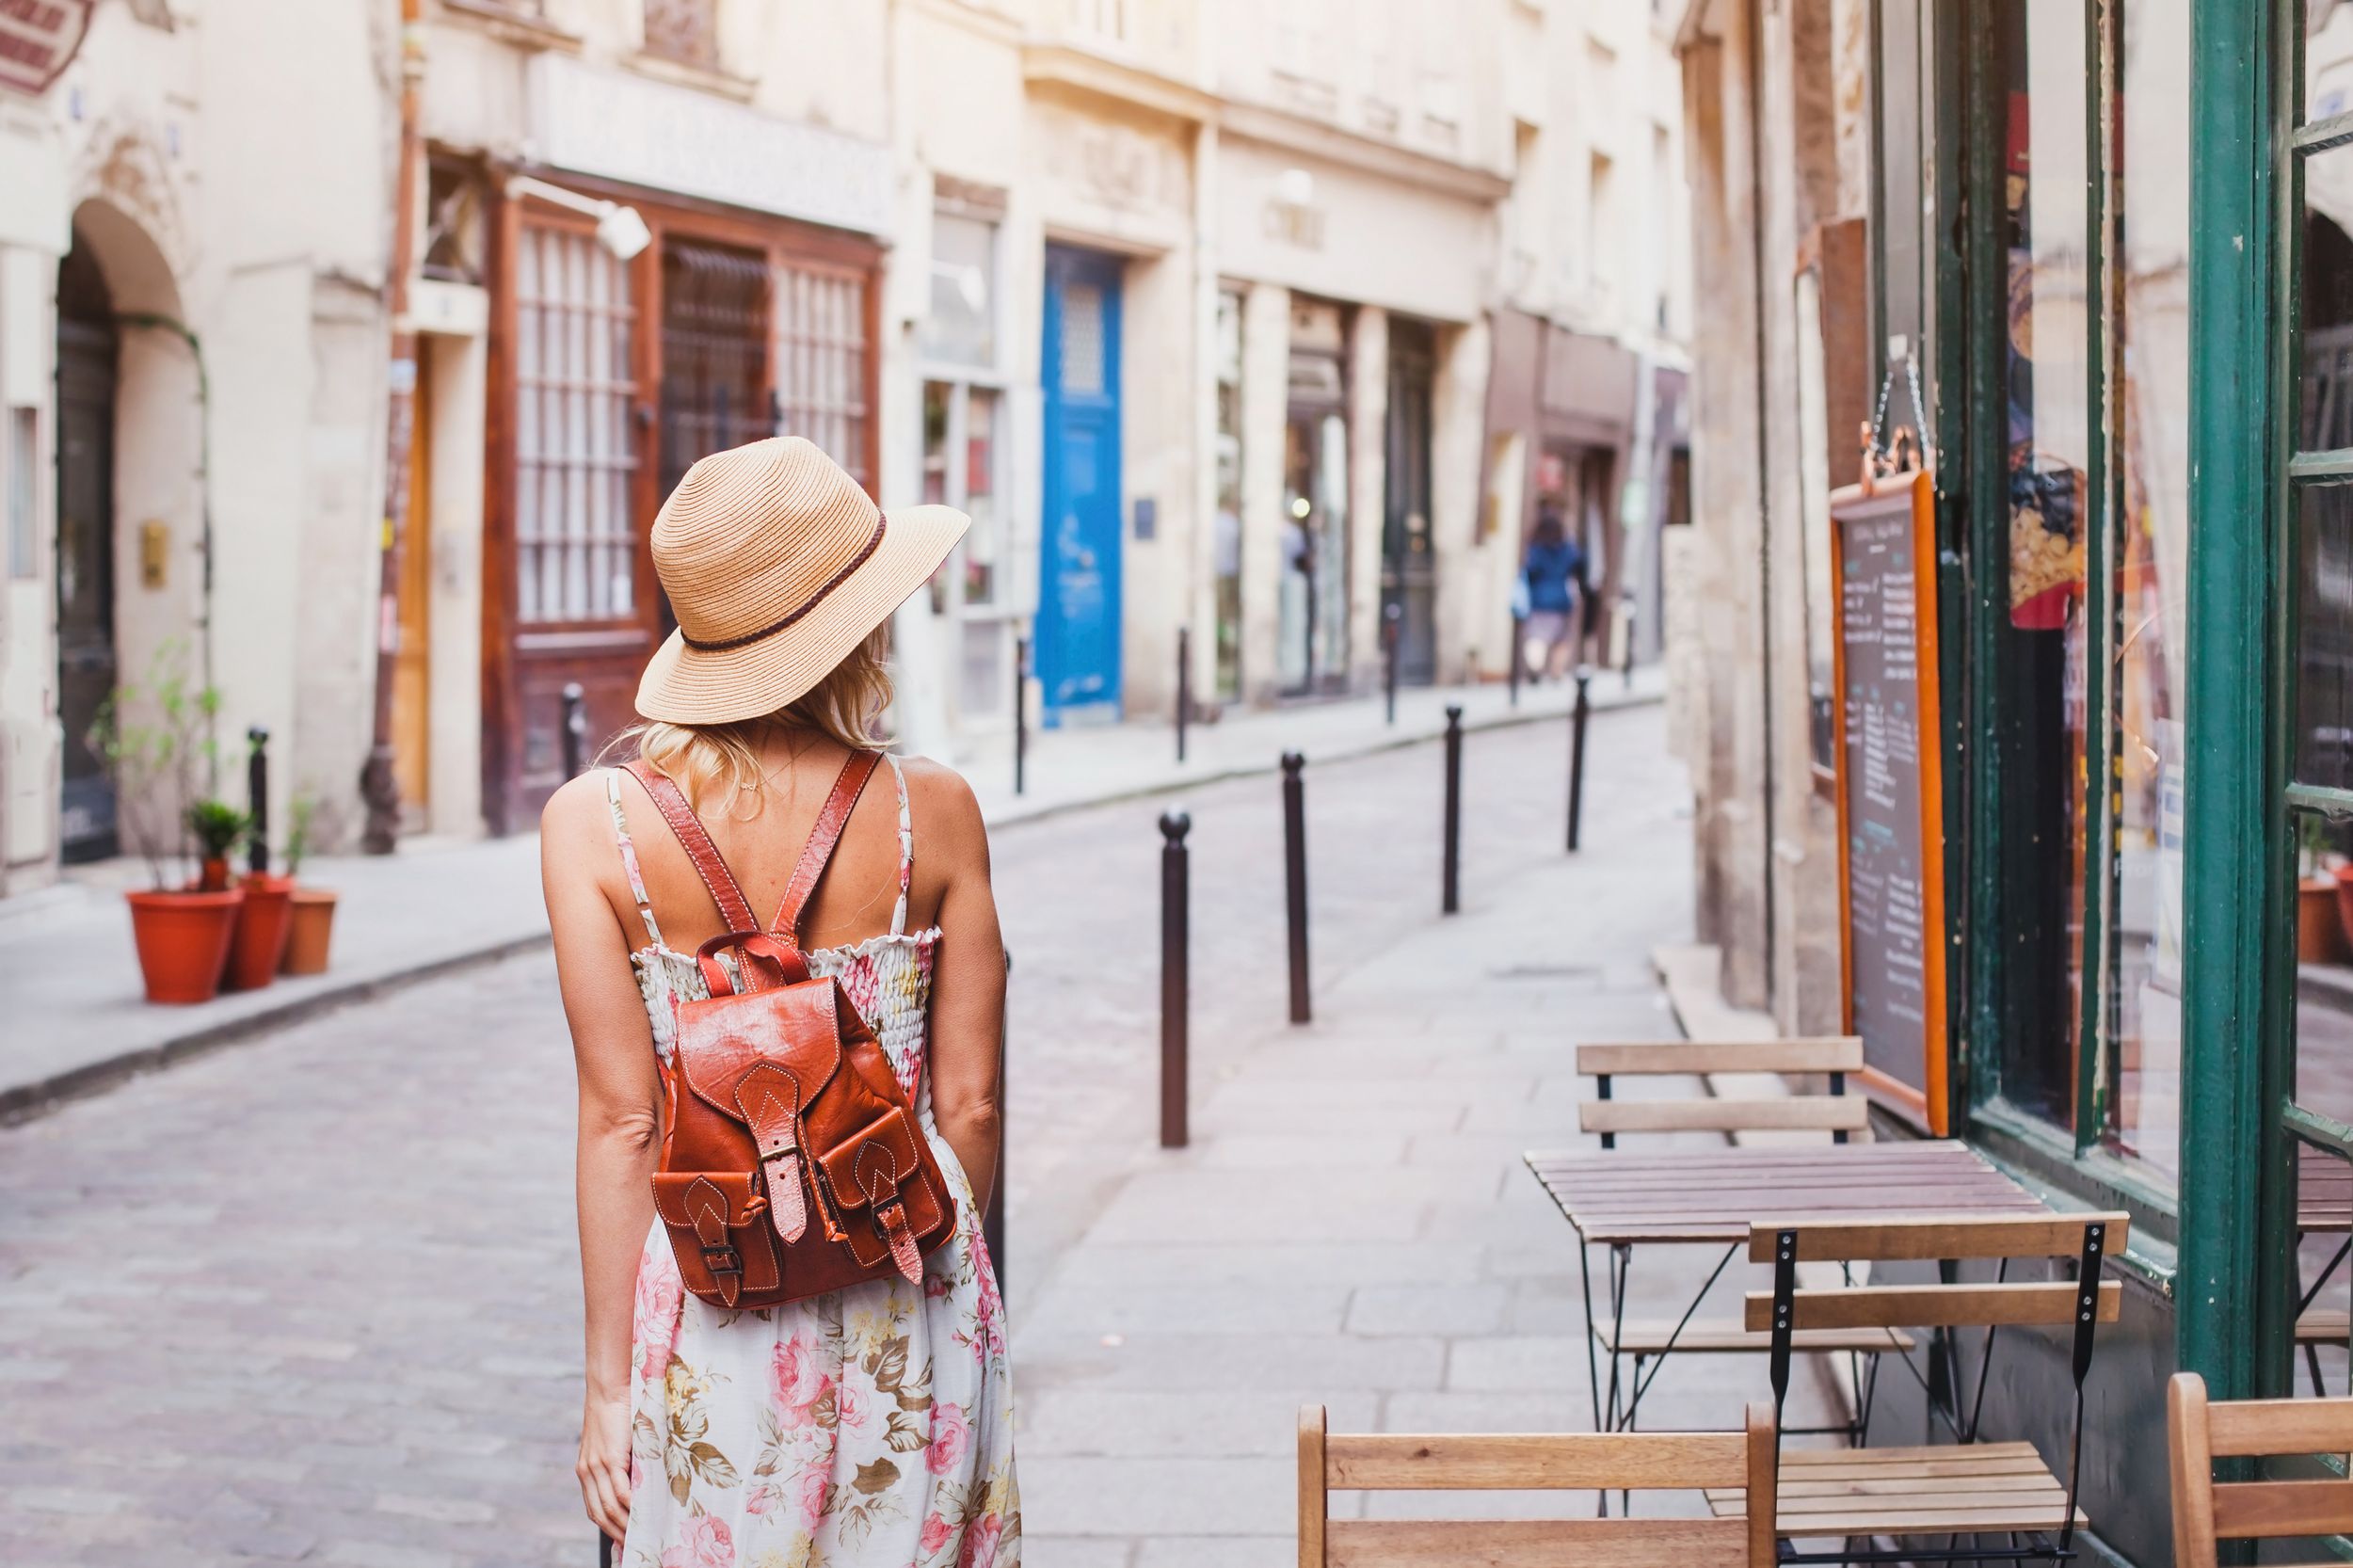 Woman walking down street with outdoor seating and shops